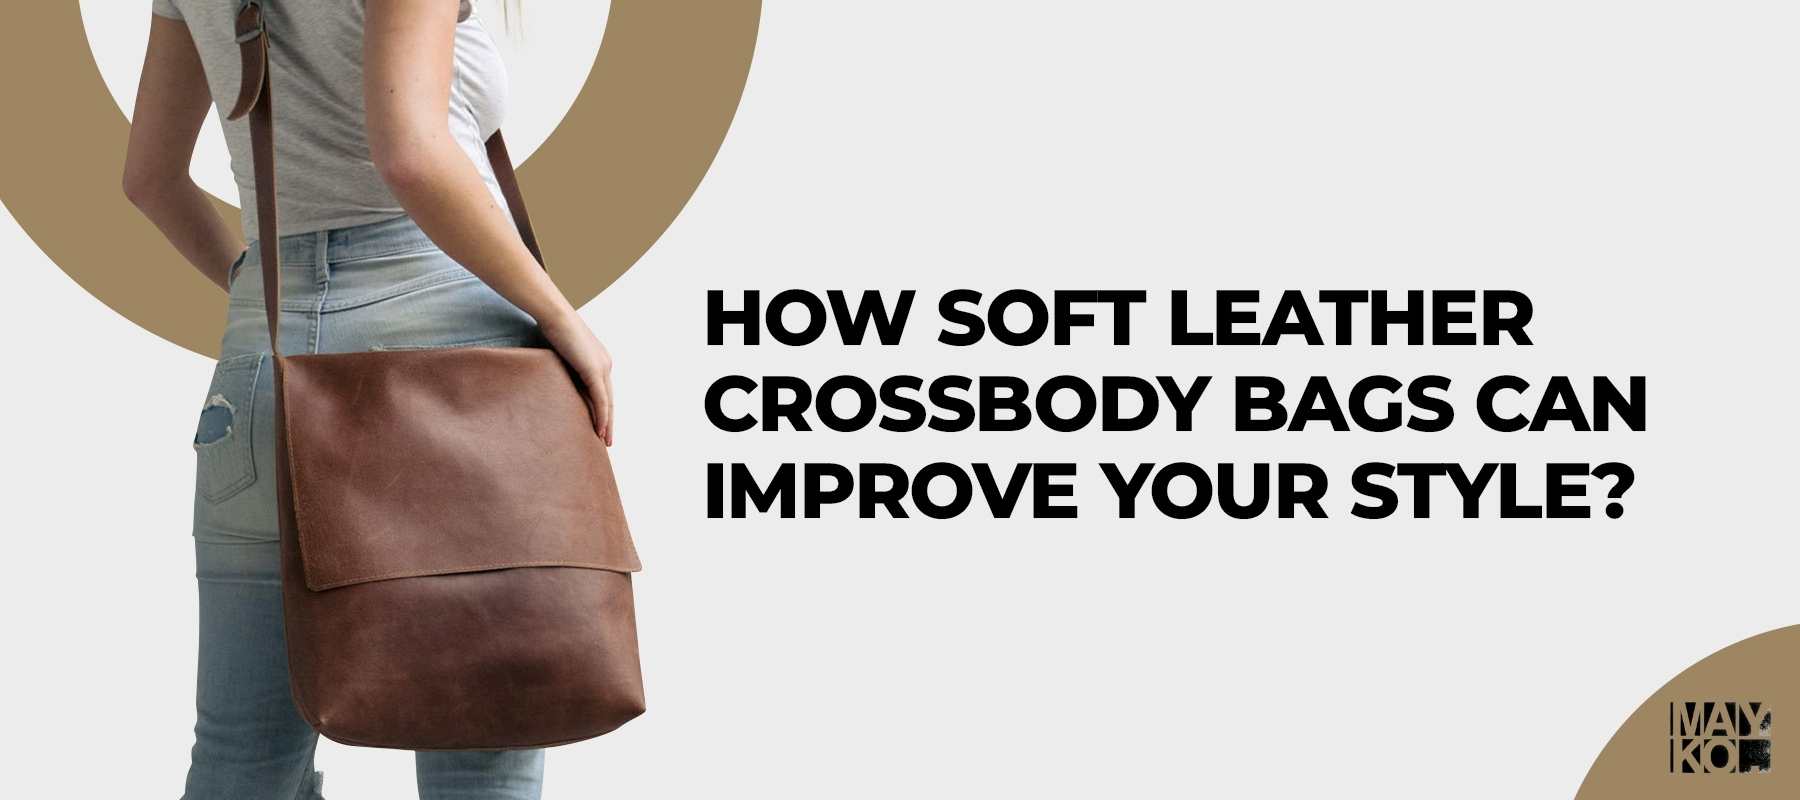 How Soft Leather Crossbody Bags Can Improve Your Style